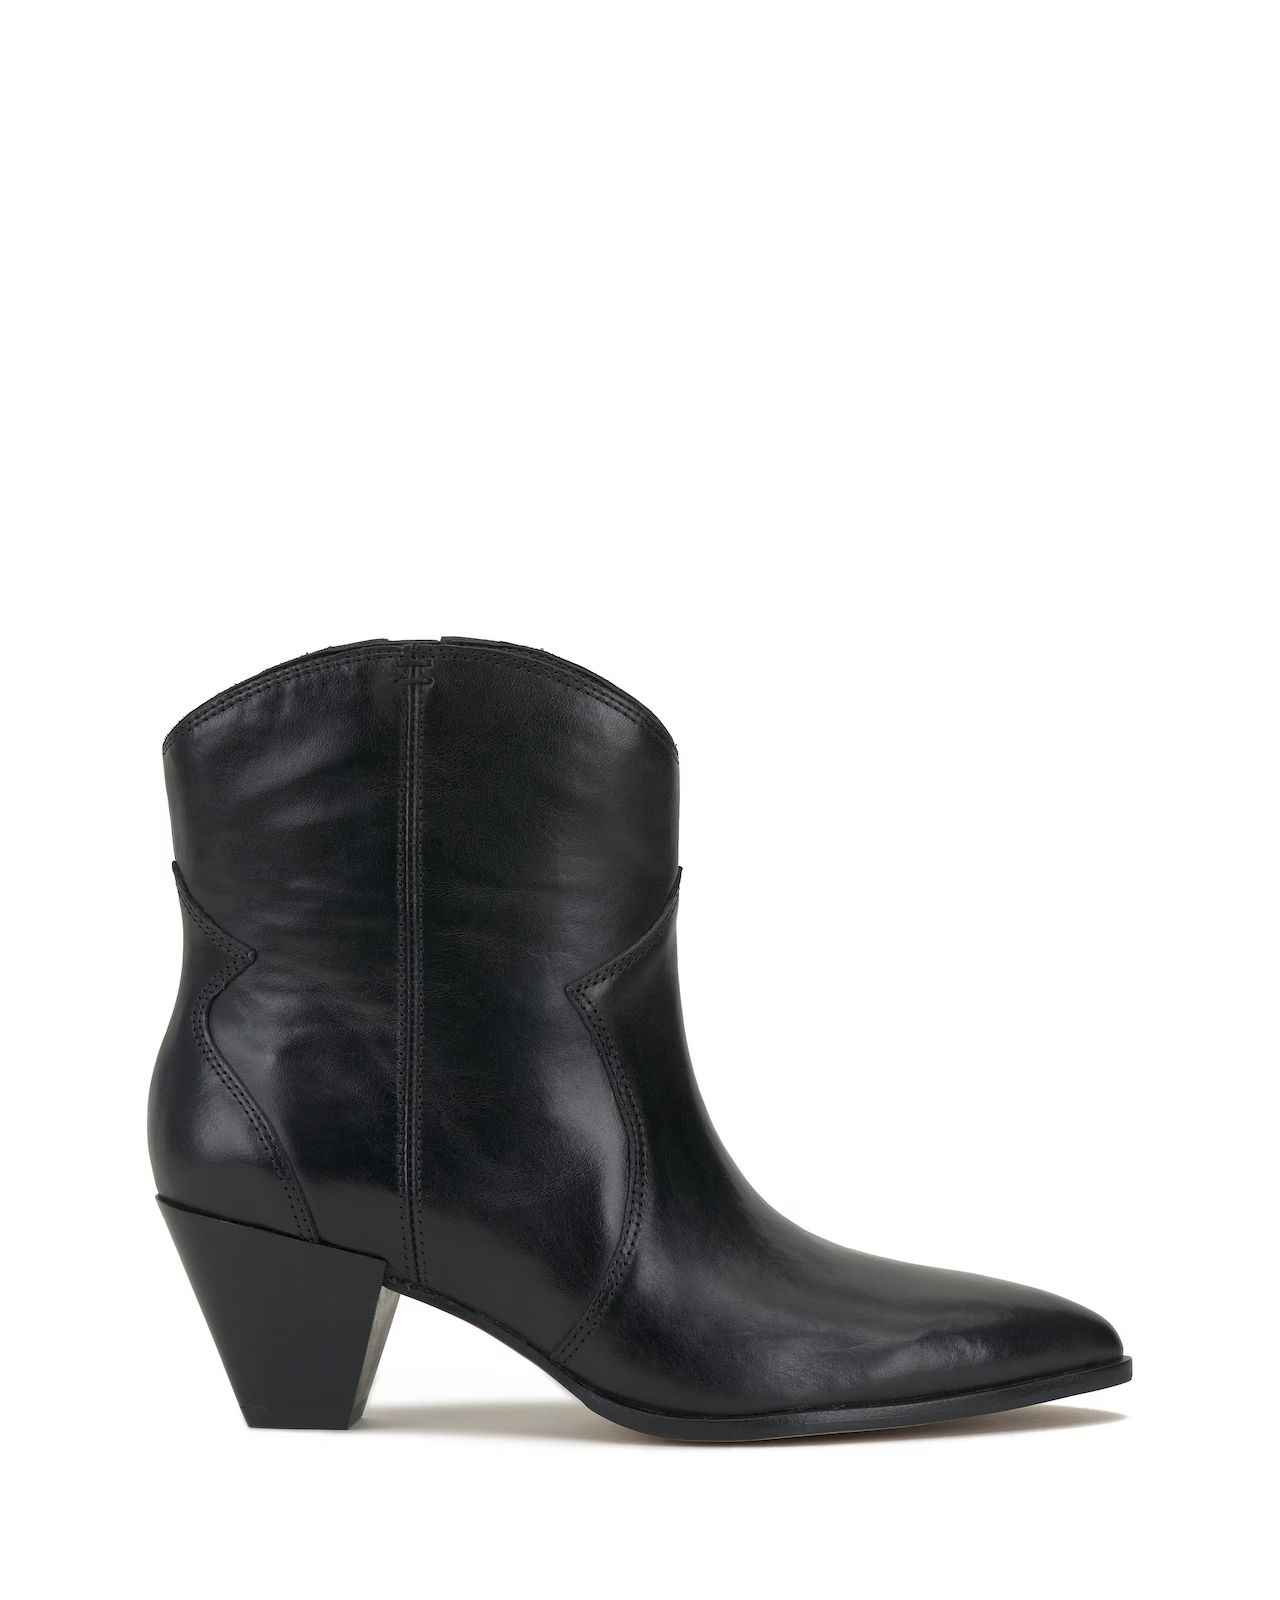 Vince Camuto Salintino Bootie | Vince Camuto